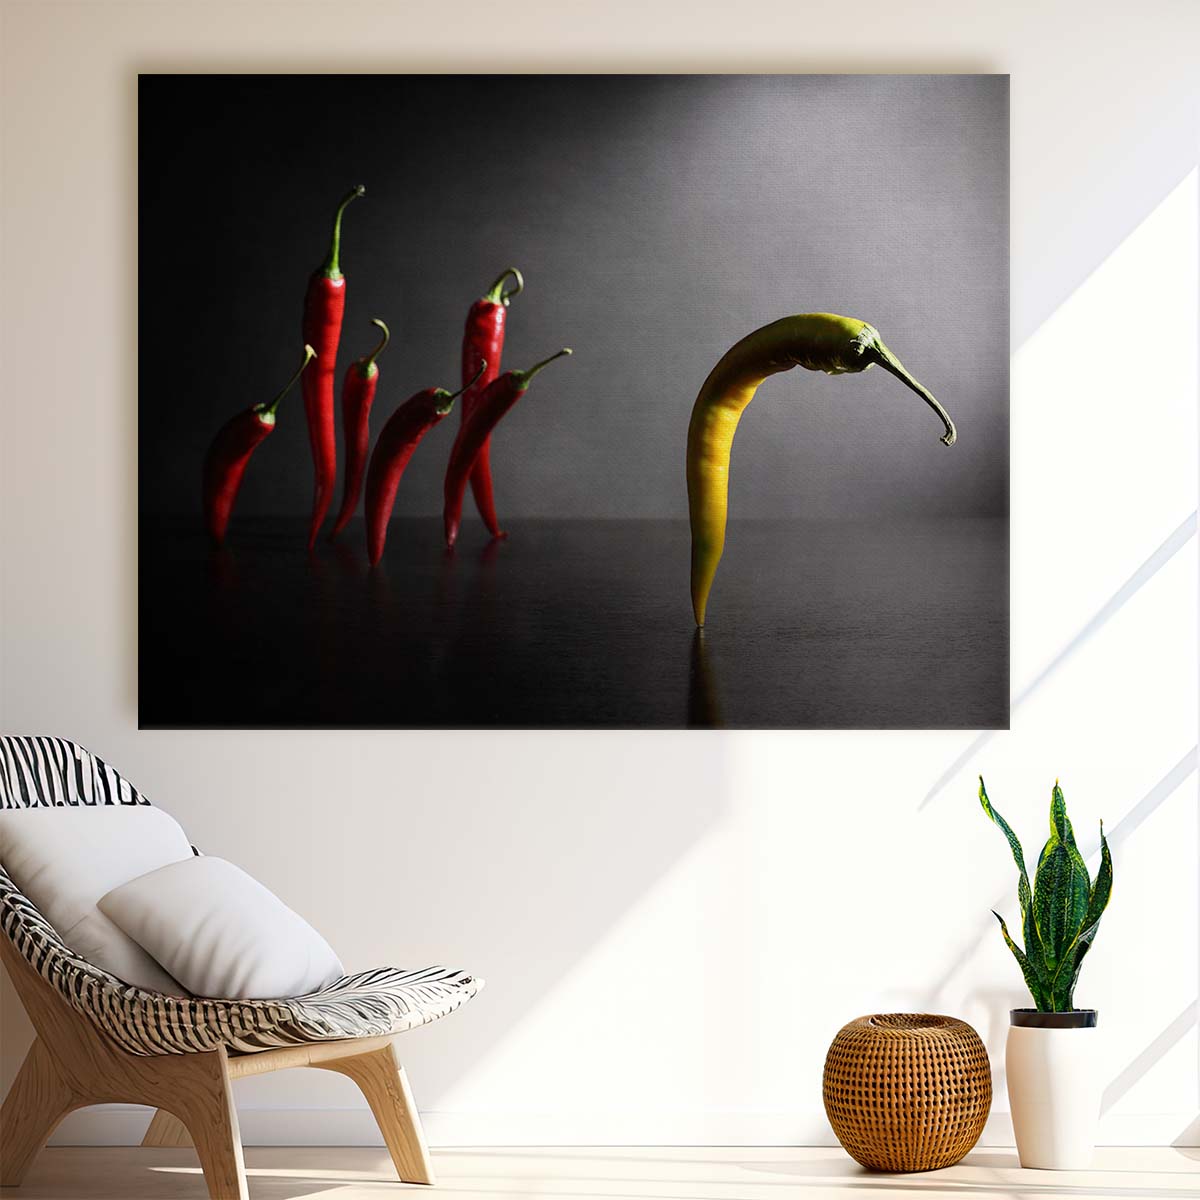 Red & Yellow Chili Spice Kitchen Vegetables Wall Art by Luxuriance Designs. Made in USA.